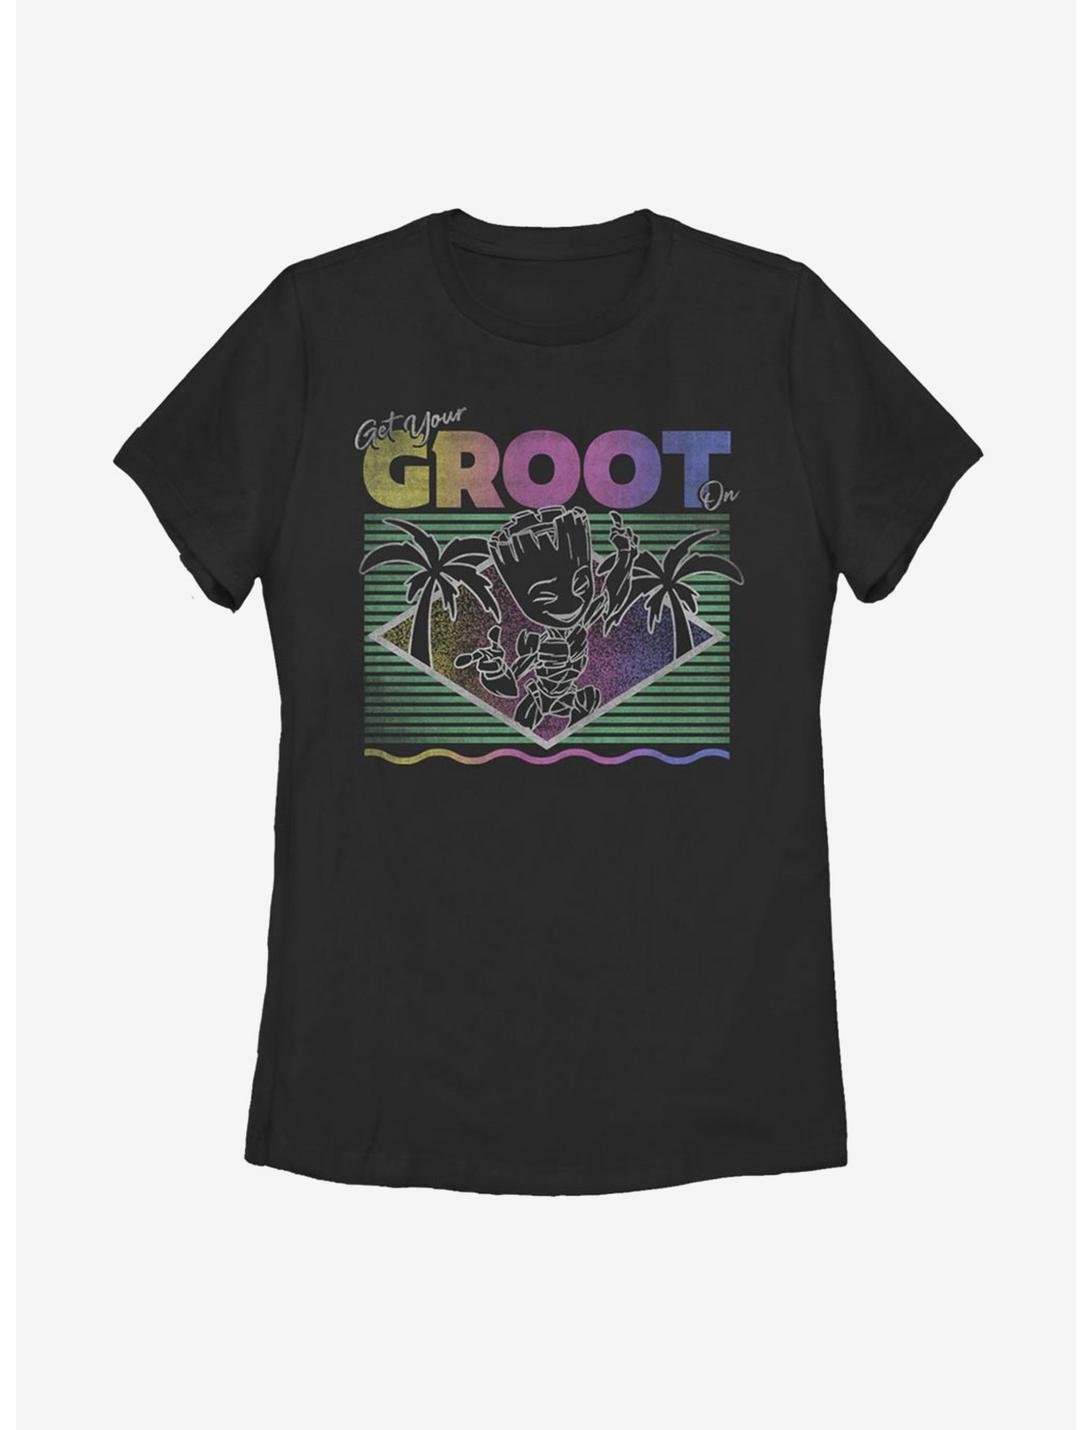 Marvel Guardians Of The Galaxy Get Your Groot On Womens T-Shirt, BLACK, hi-res